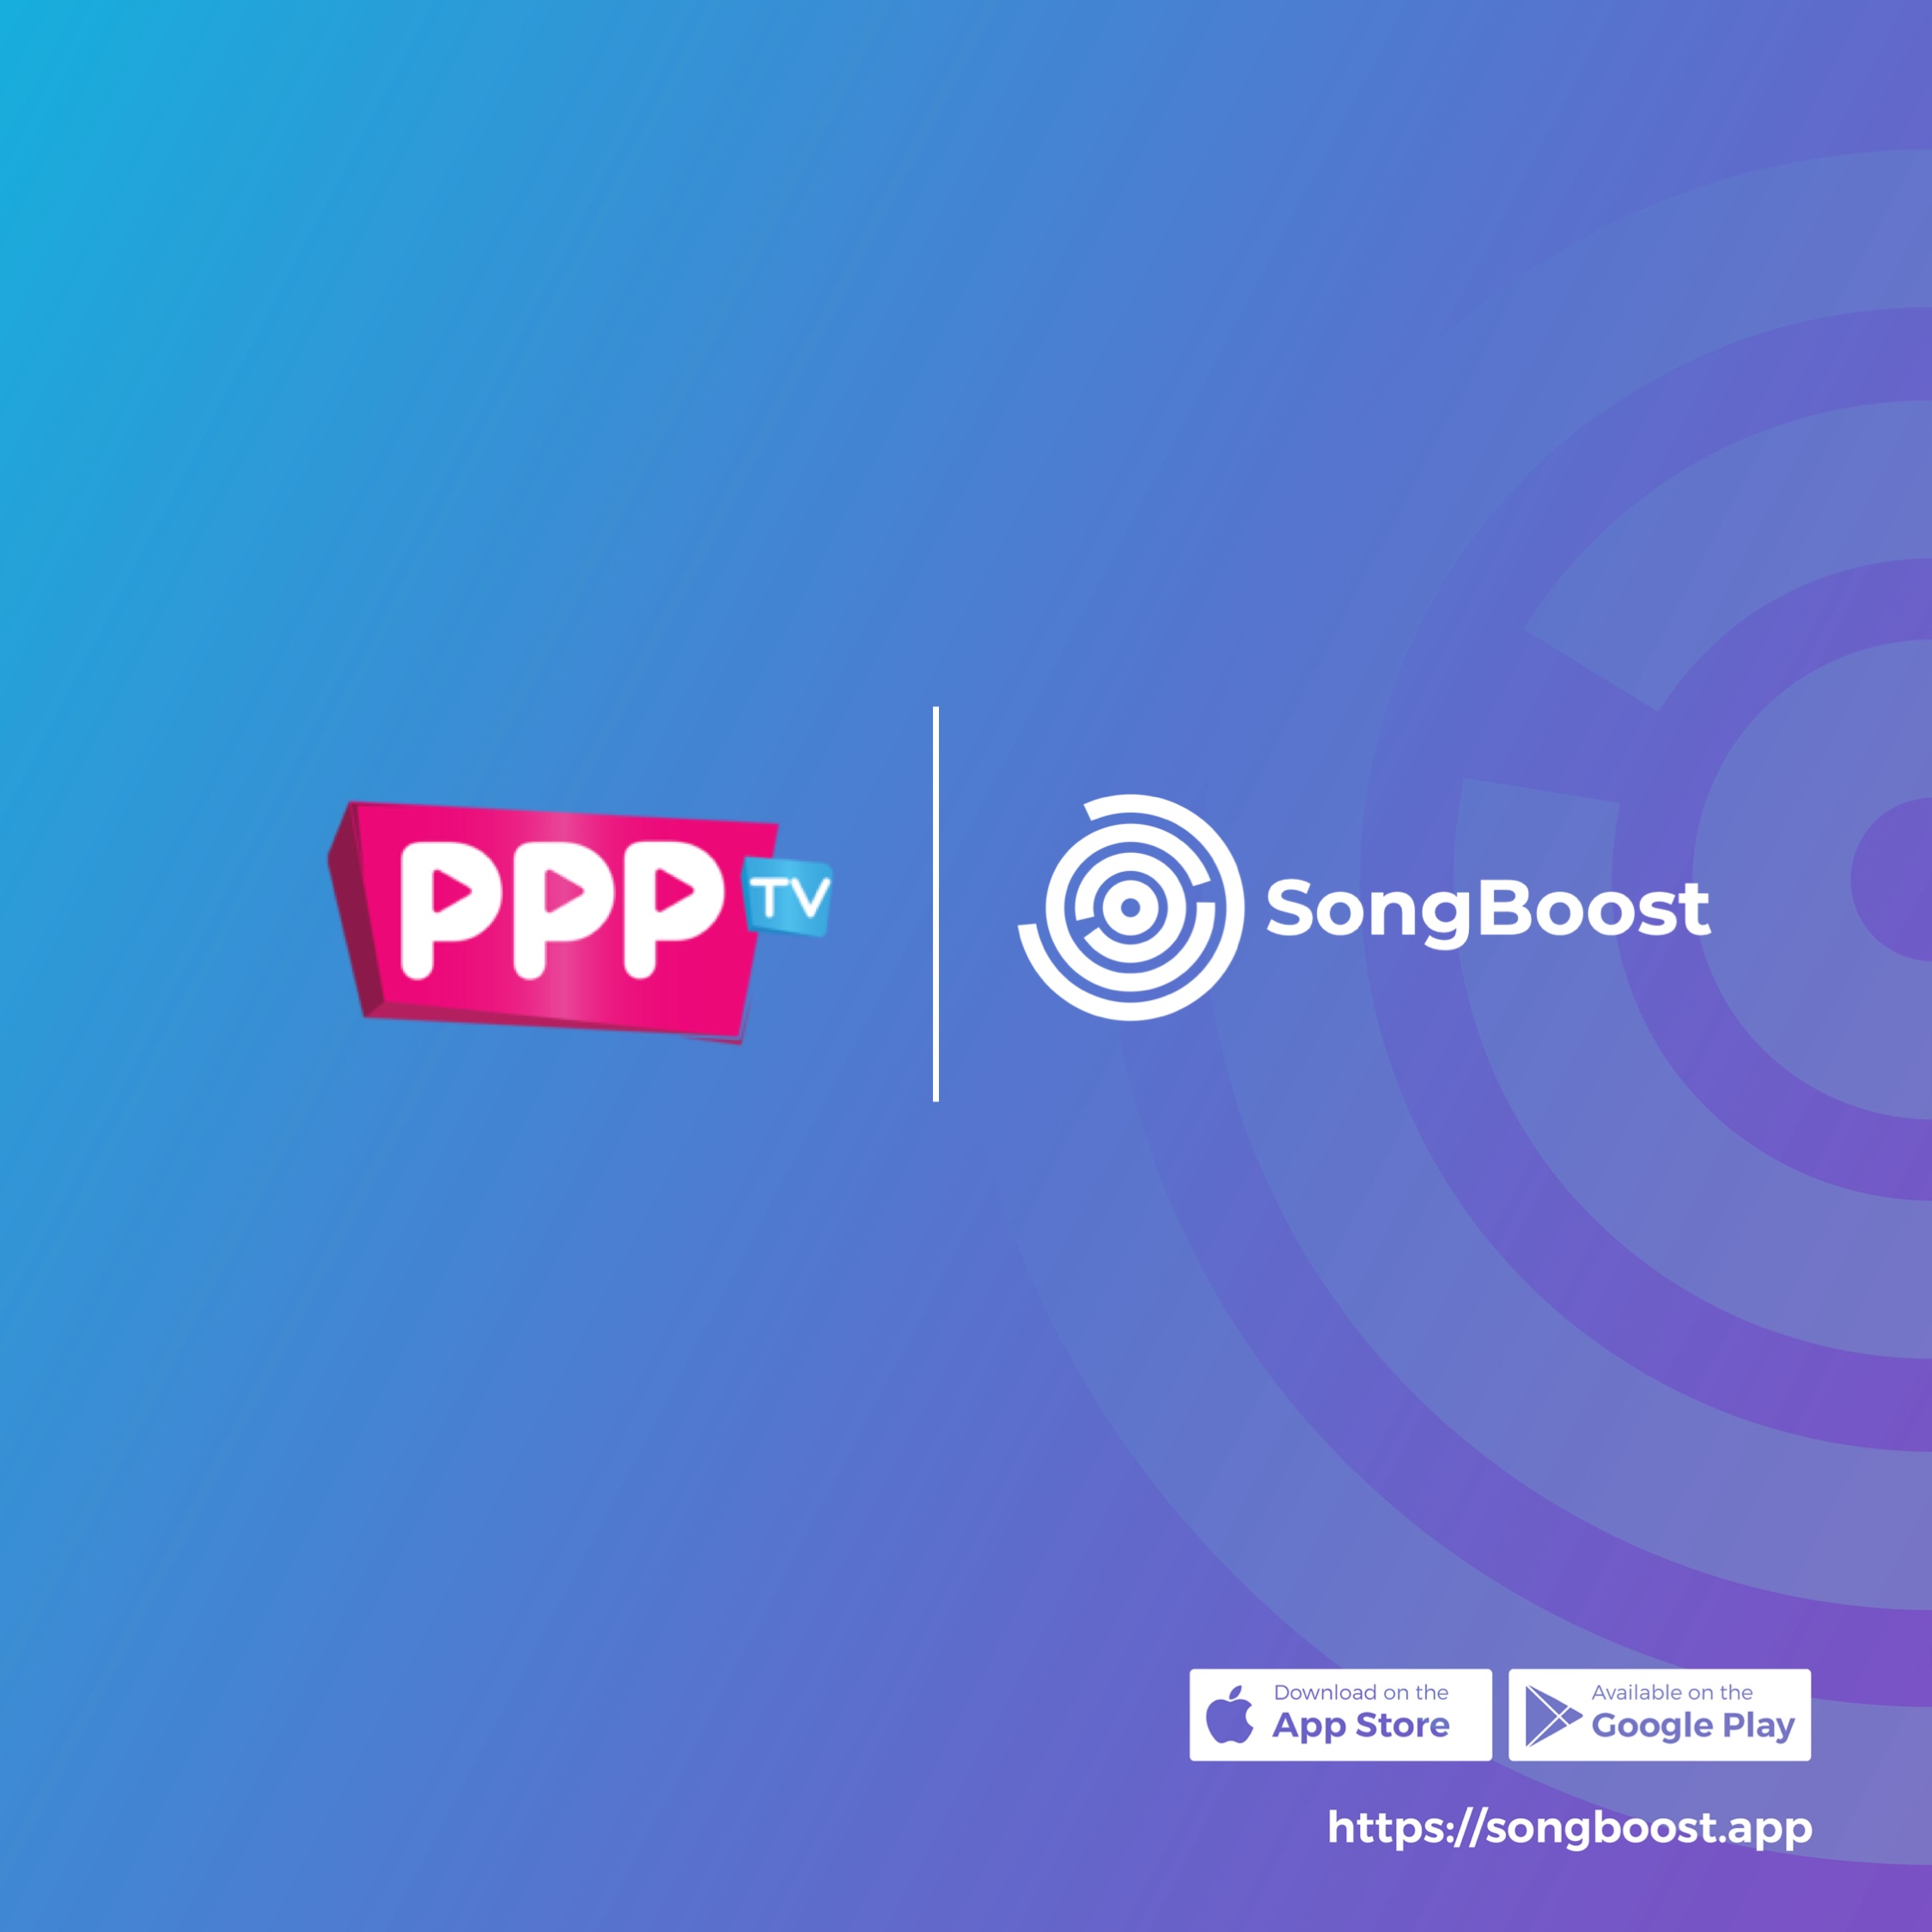 PPP TV - SongBoost